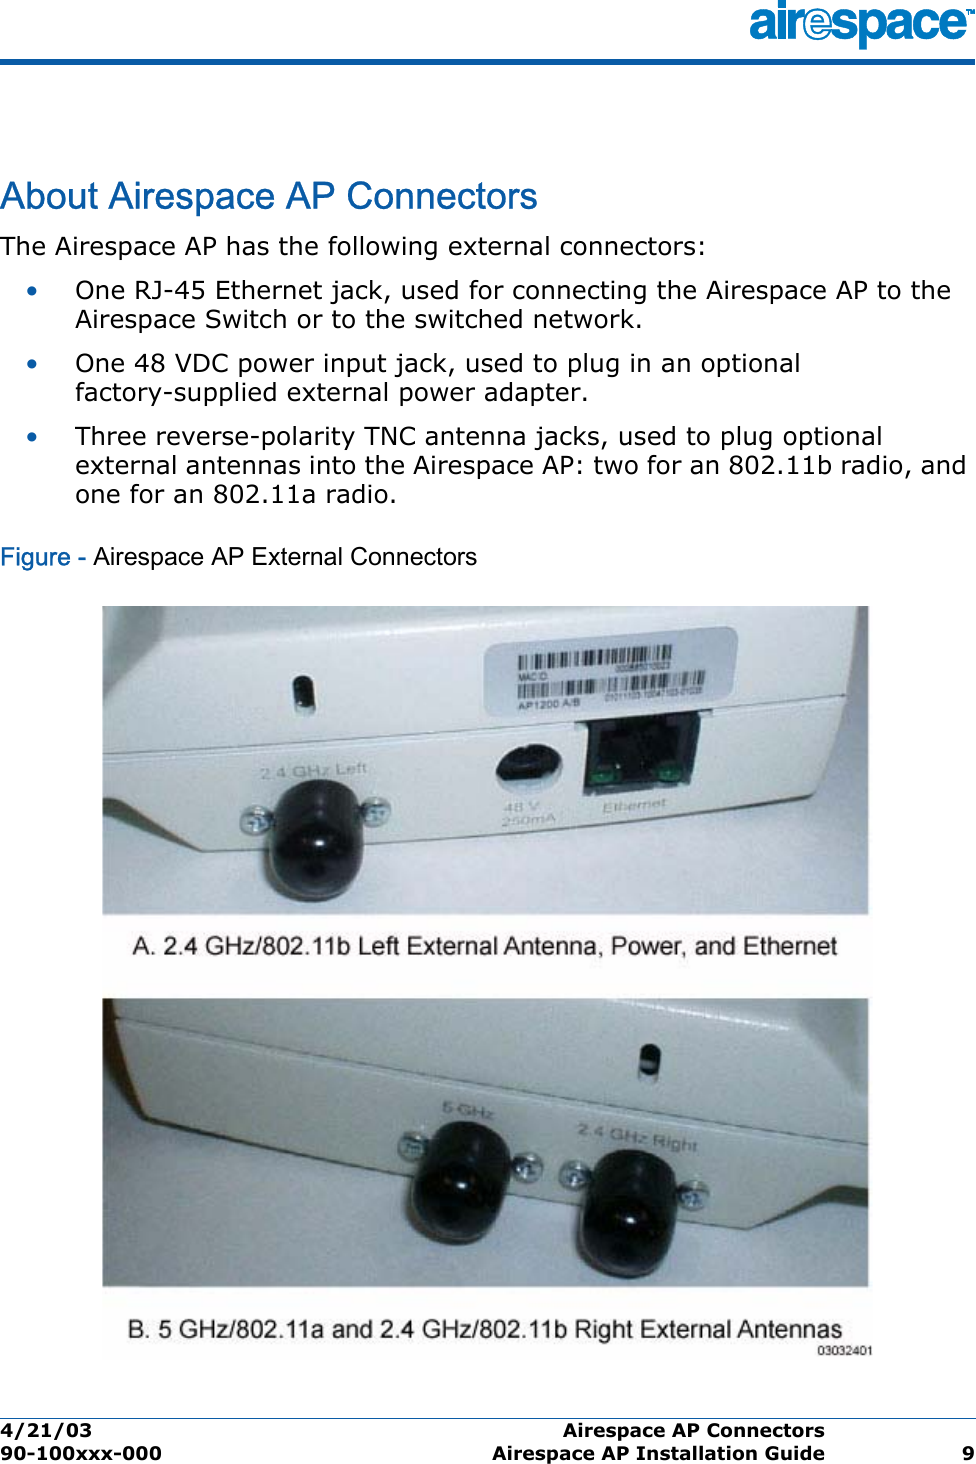 4/21/03 Airespace AP Connectors  90-100xxx-000 Airespace AP Installation Guide 9Airespace AP ConnectorsAbout Airespace AP ConnectorsThe Airespace AP has the following external connectors:•One RJ-45 Ethernet jack, used for connecting the Airespace AP to the Airespace Switch or to the switched network.•One 48 VDC power input jack, used to plug in an optional factory-supplied external power adapter.•Three reverse-polarity TNC antenna jacks, used to plug optional external antennas into the Airespace AP: two for an 802.11b radio, and one for an 802.11a radio.Figure - Airespace AP External Connectors